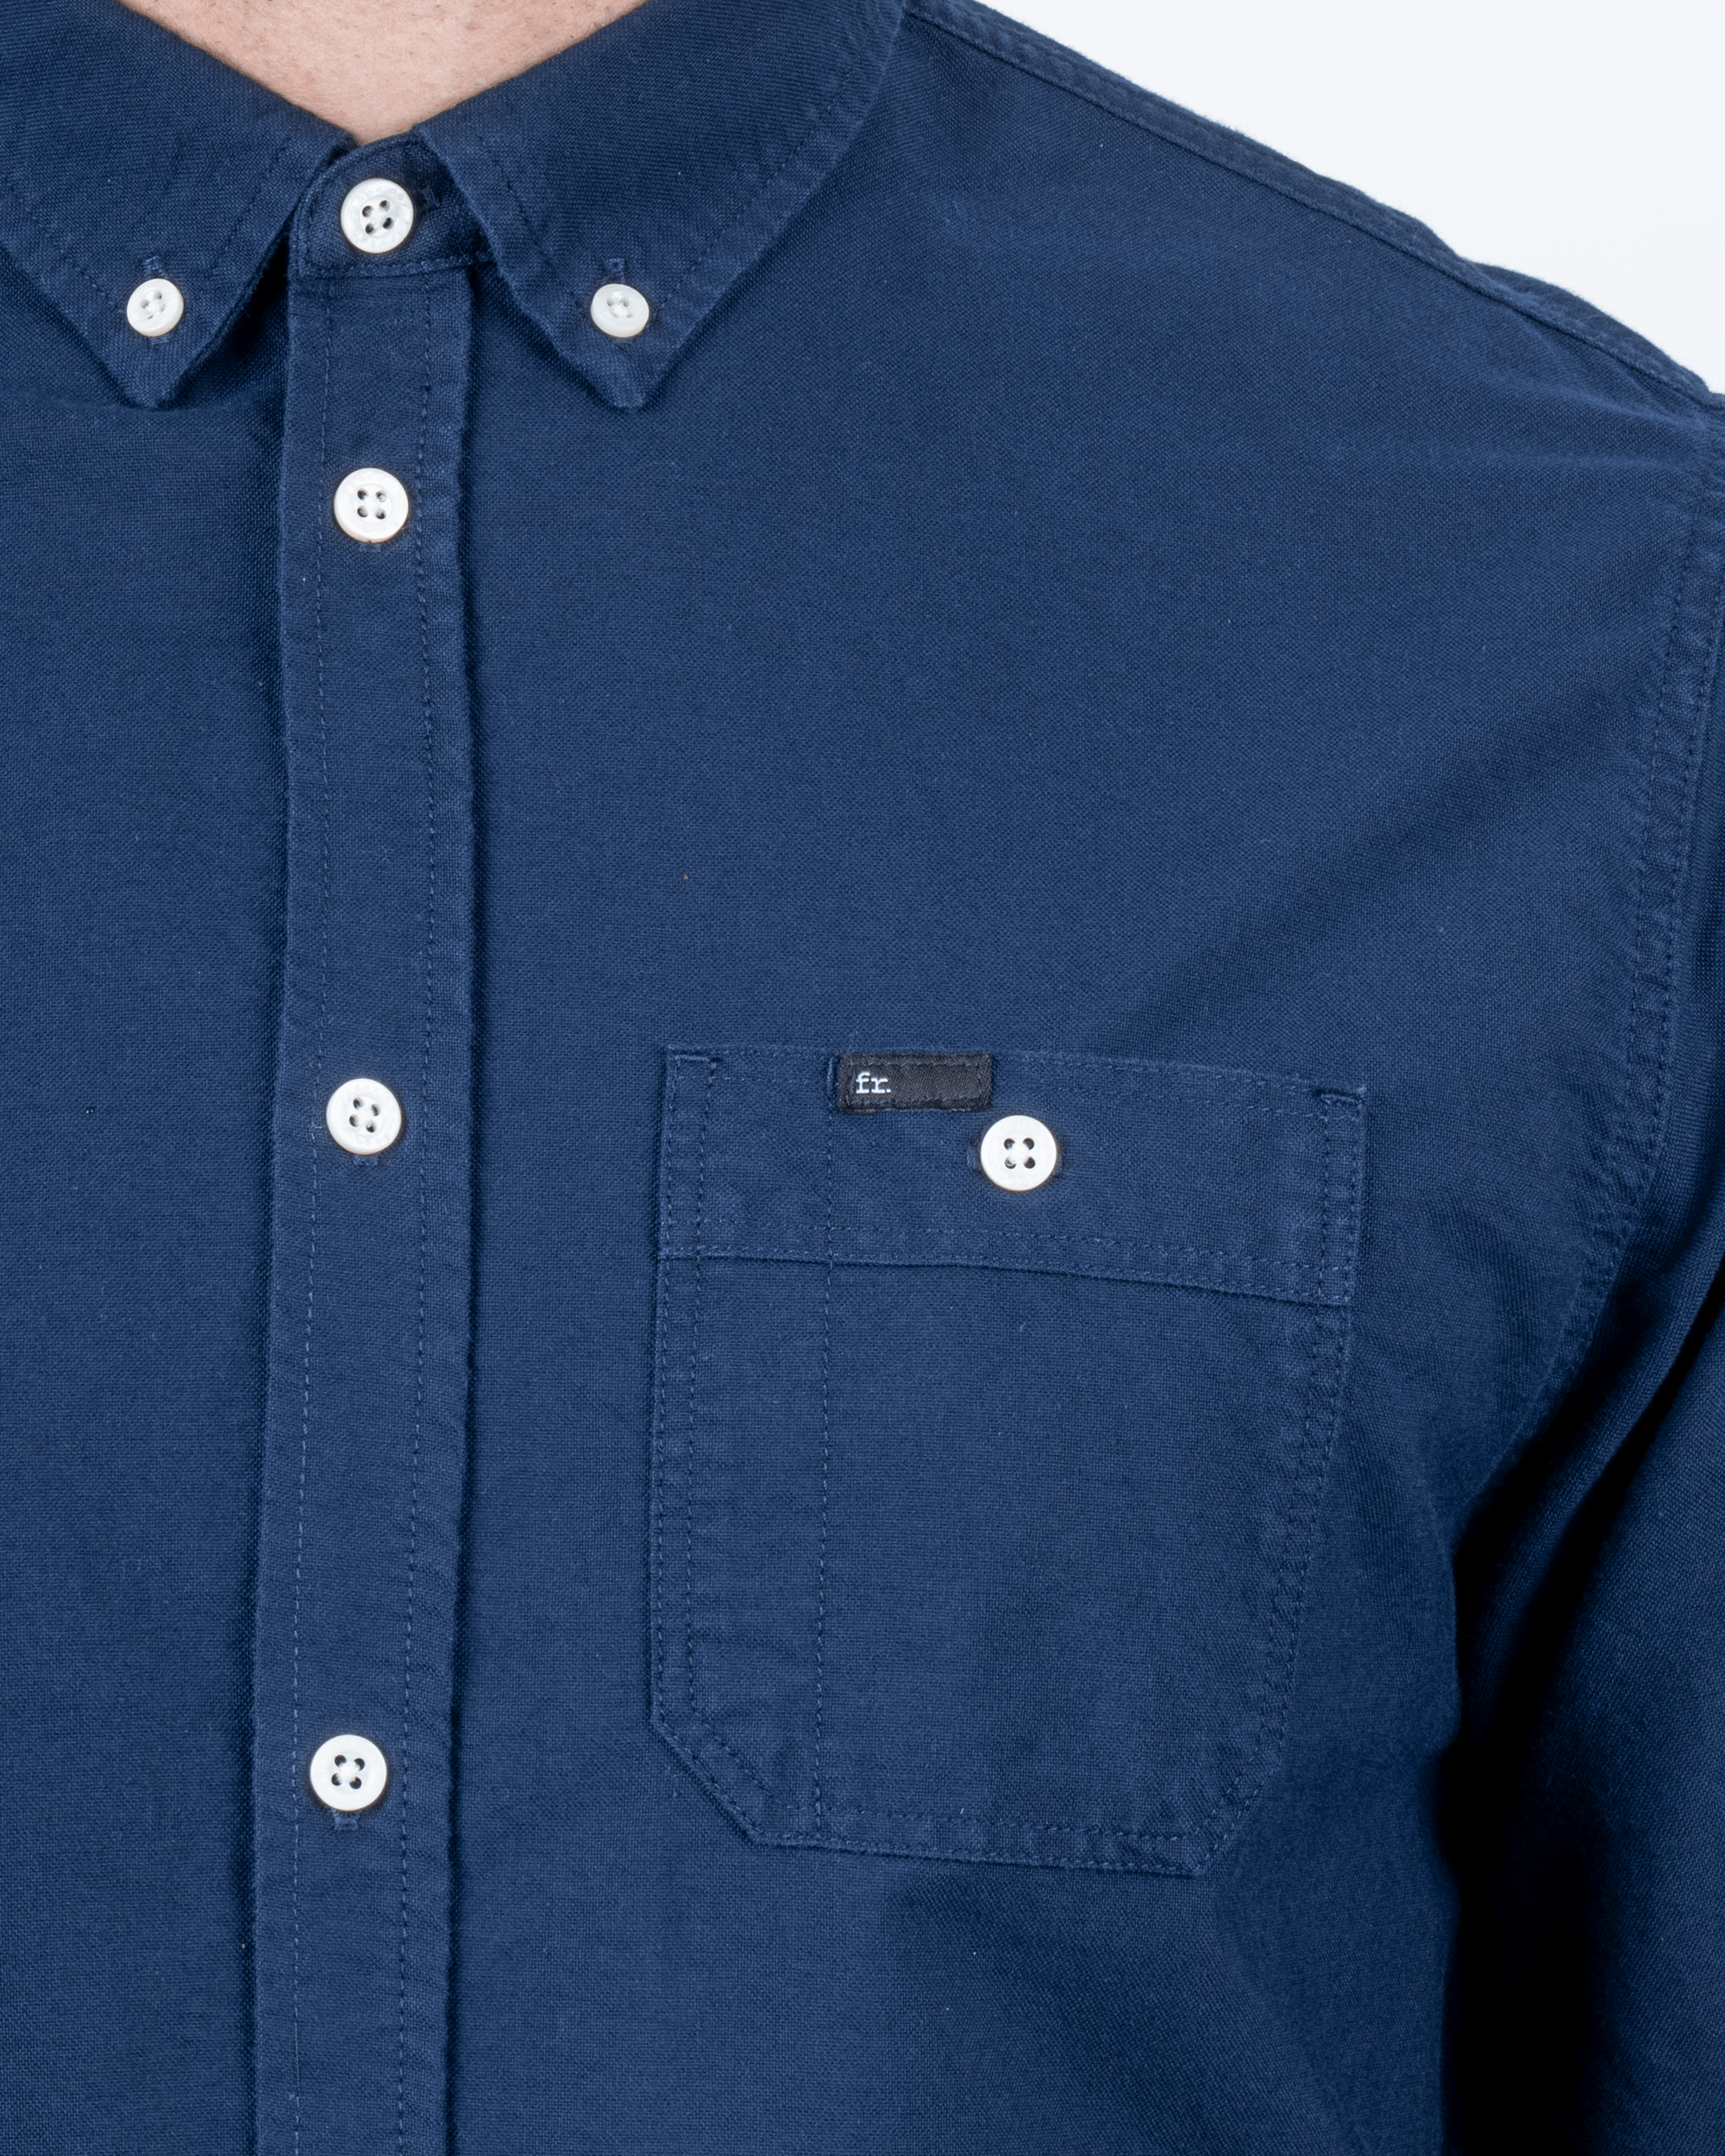 Foreign Rider Co Organic Cotton Navy Utility Button Down Oxford Button Chest Pocket with FR. Tag